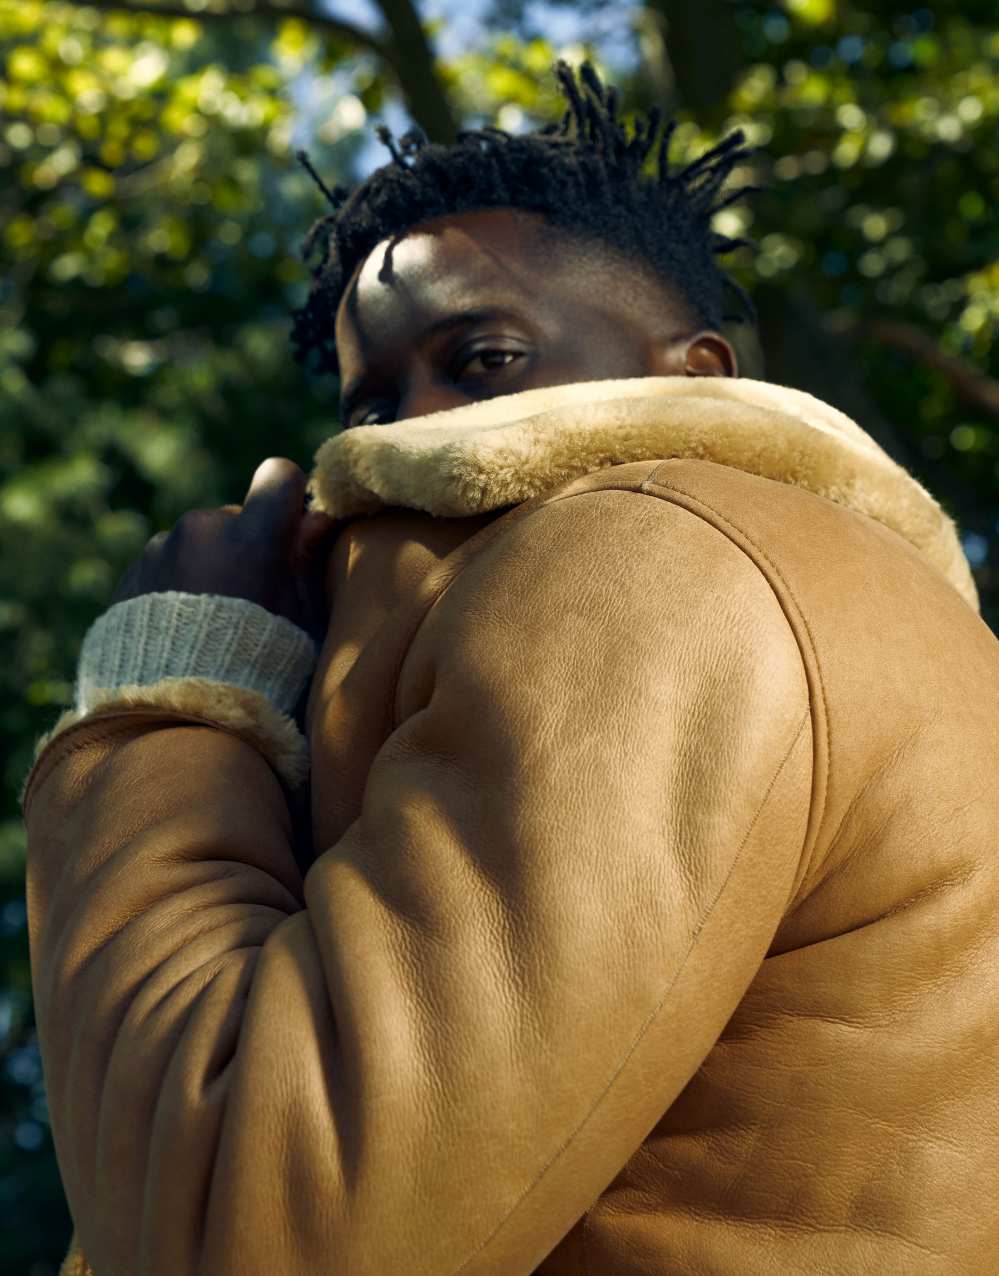 BMX Star Nigel Sylvester on His Functional and Fashionable Style